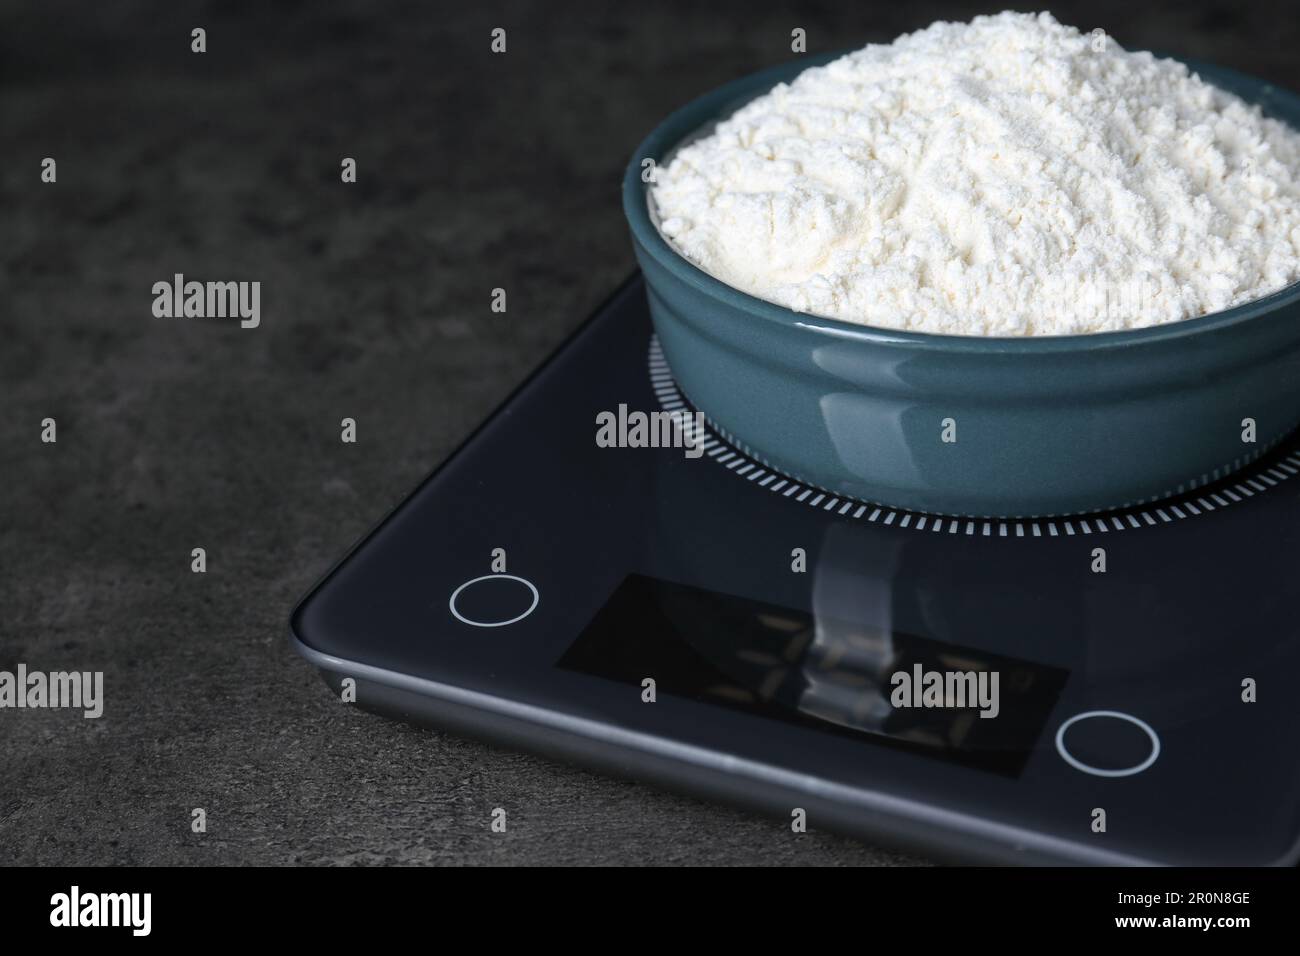 https://c8.alamy.com/comp/2R0N8GE/electronic-scales-with-flour-on-black-table-closeup-space-for-text-2R0N8GE.jpg